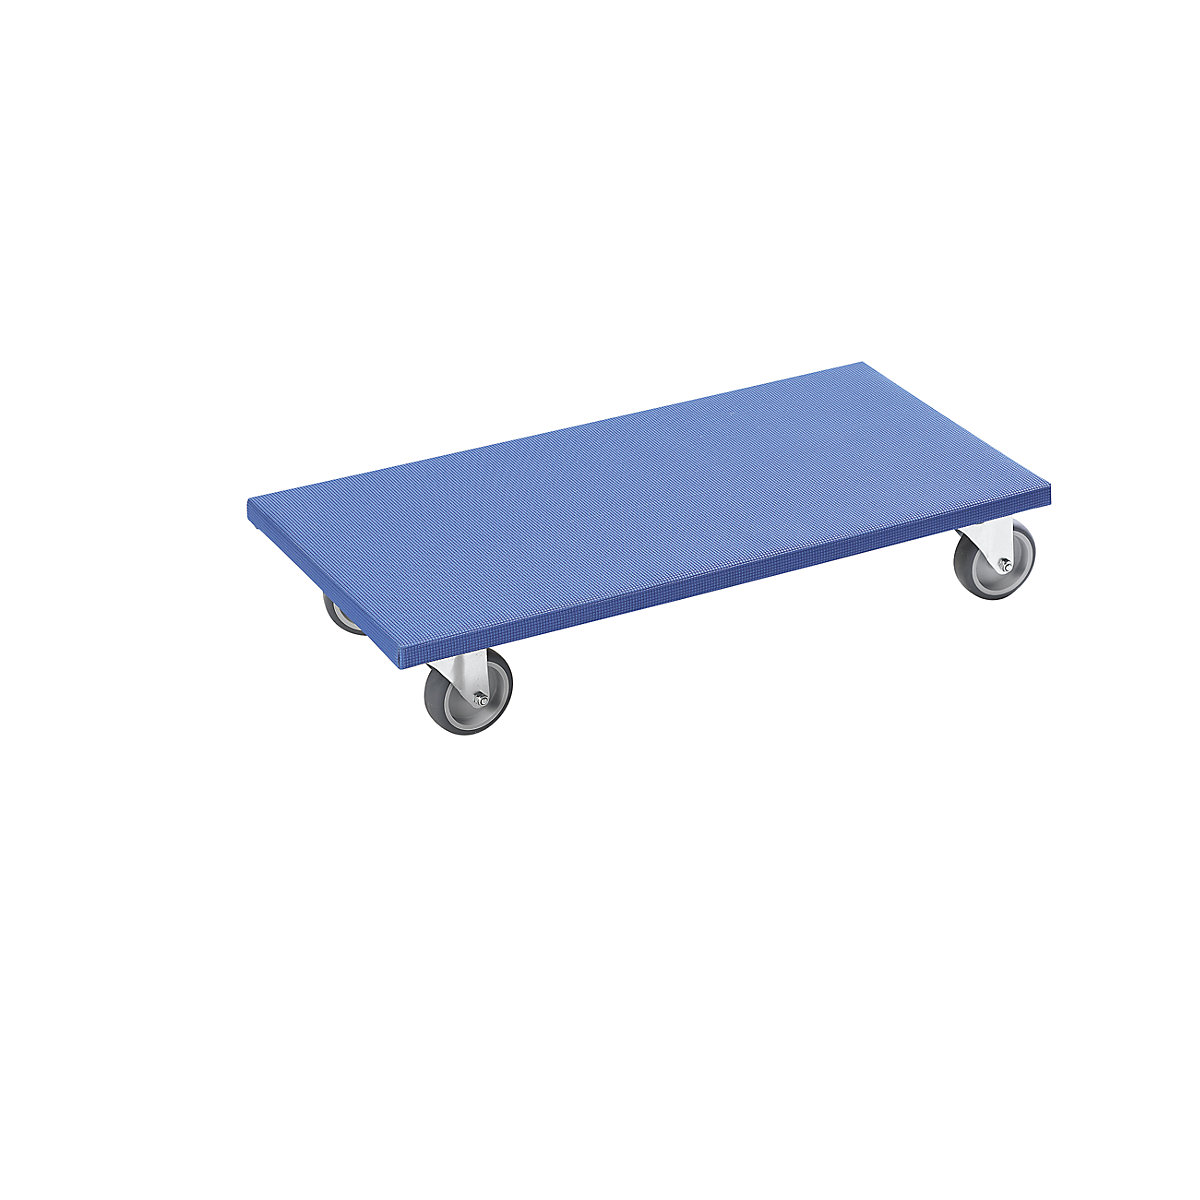 Furniture dolly, LxWxH 600 x 300 x 120 mm, pack of 2, 2+ packs-6